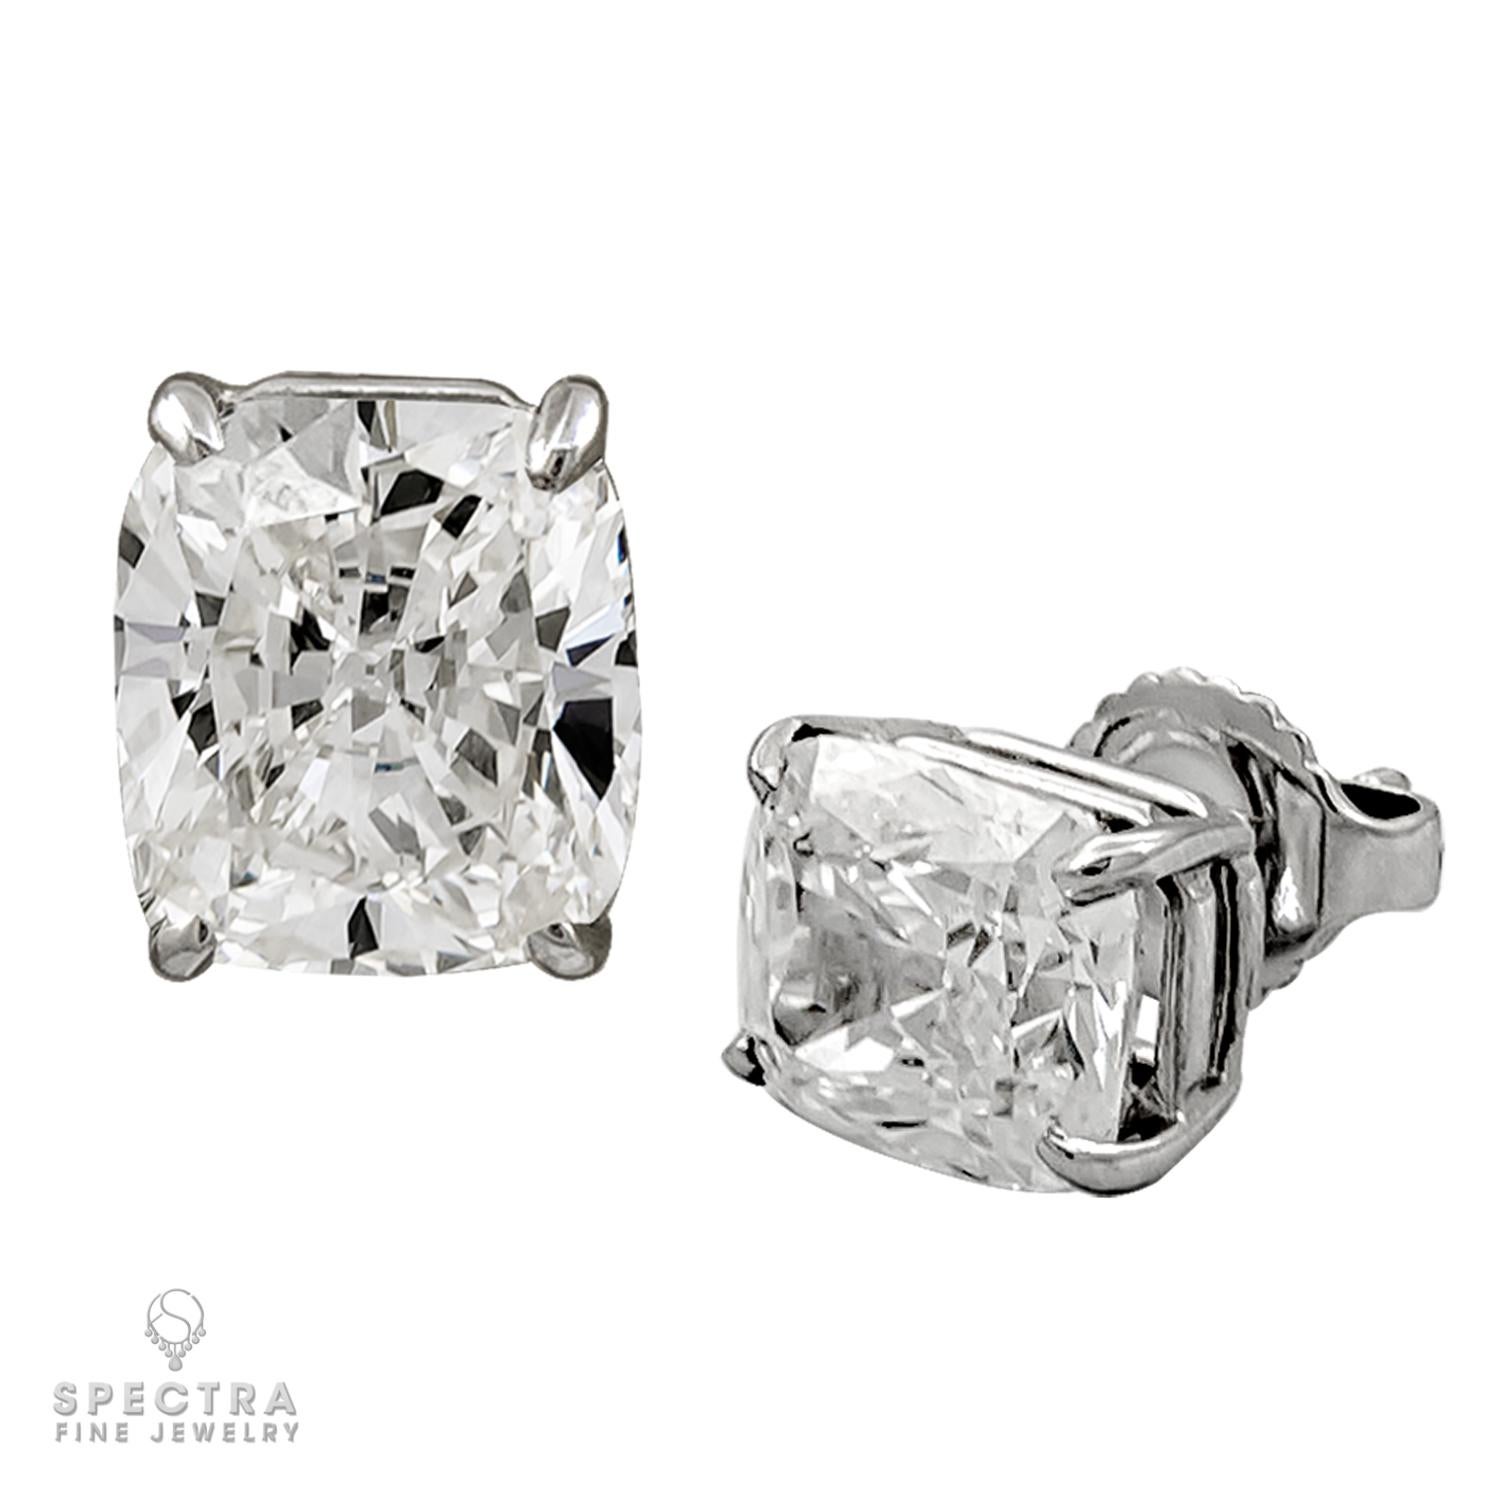 Introducing our stunning pair of stud earrings, featuring two dazzling cushion-shaped diamonds that are sure to catch the eye. With a weight of 2.04 carats and 2.07 carats respectively, these G color, VS1 clarity diamonds have been certified by the